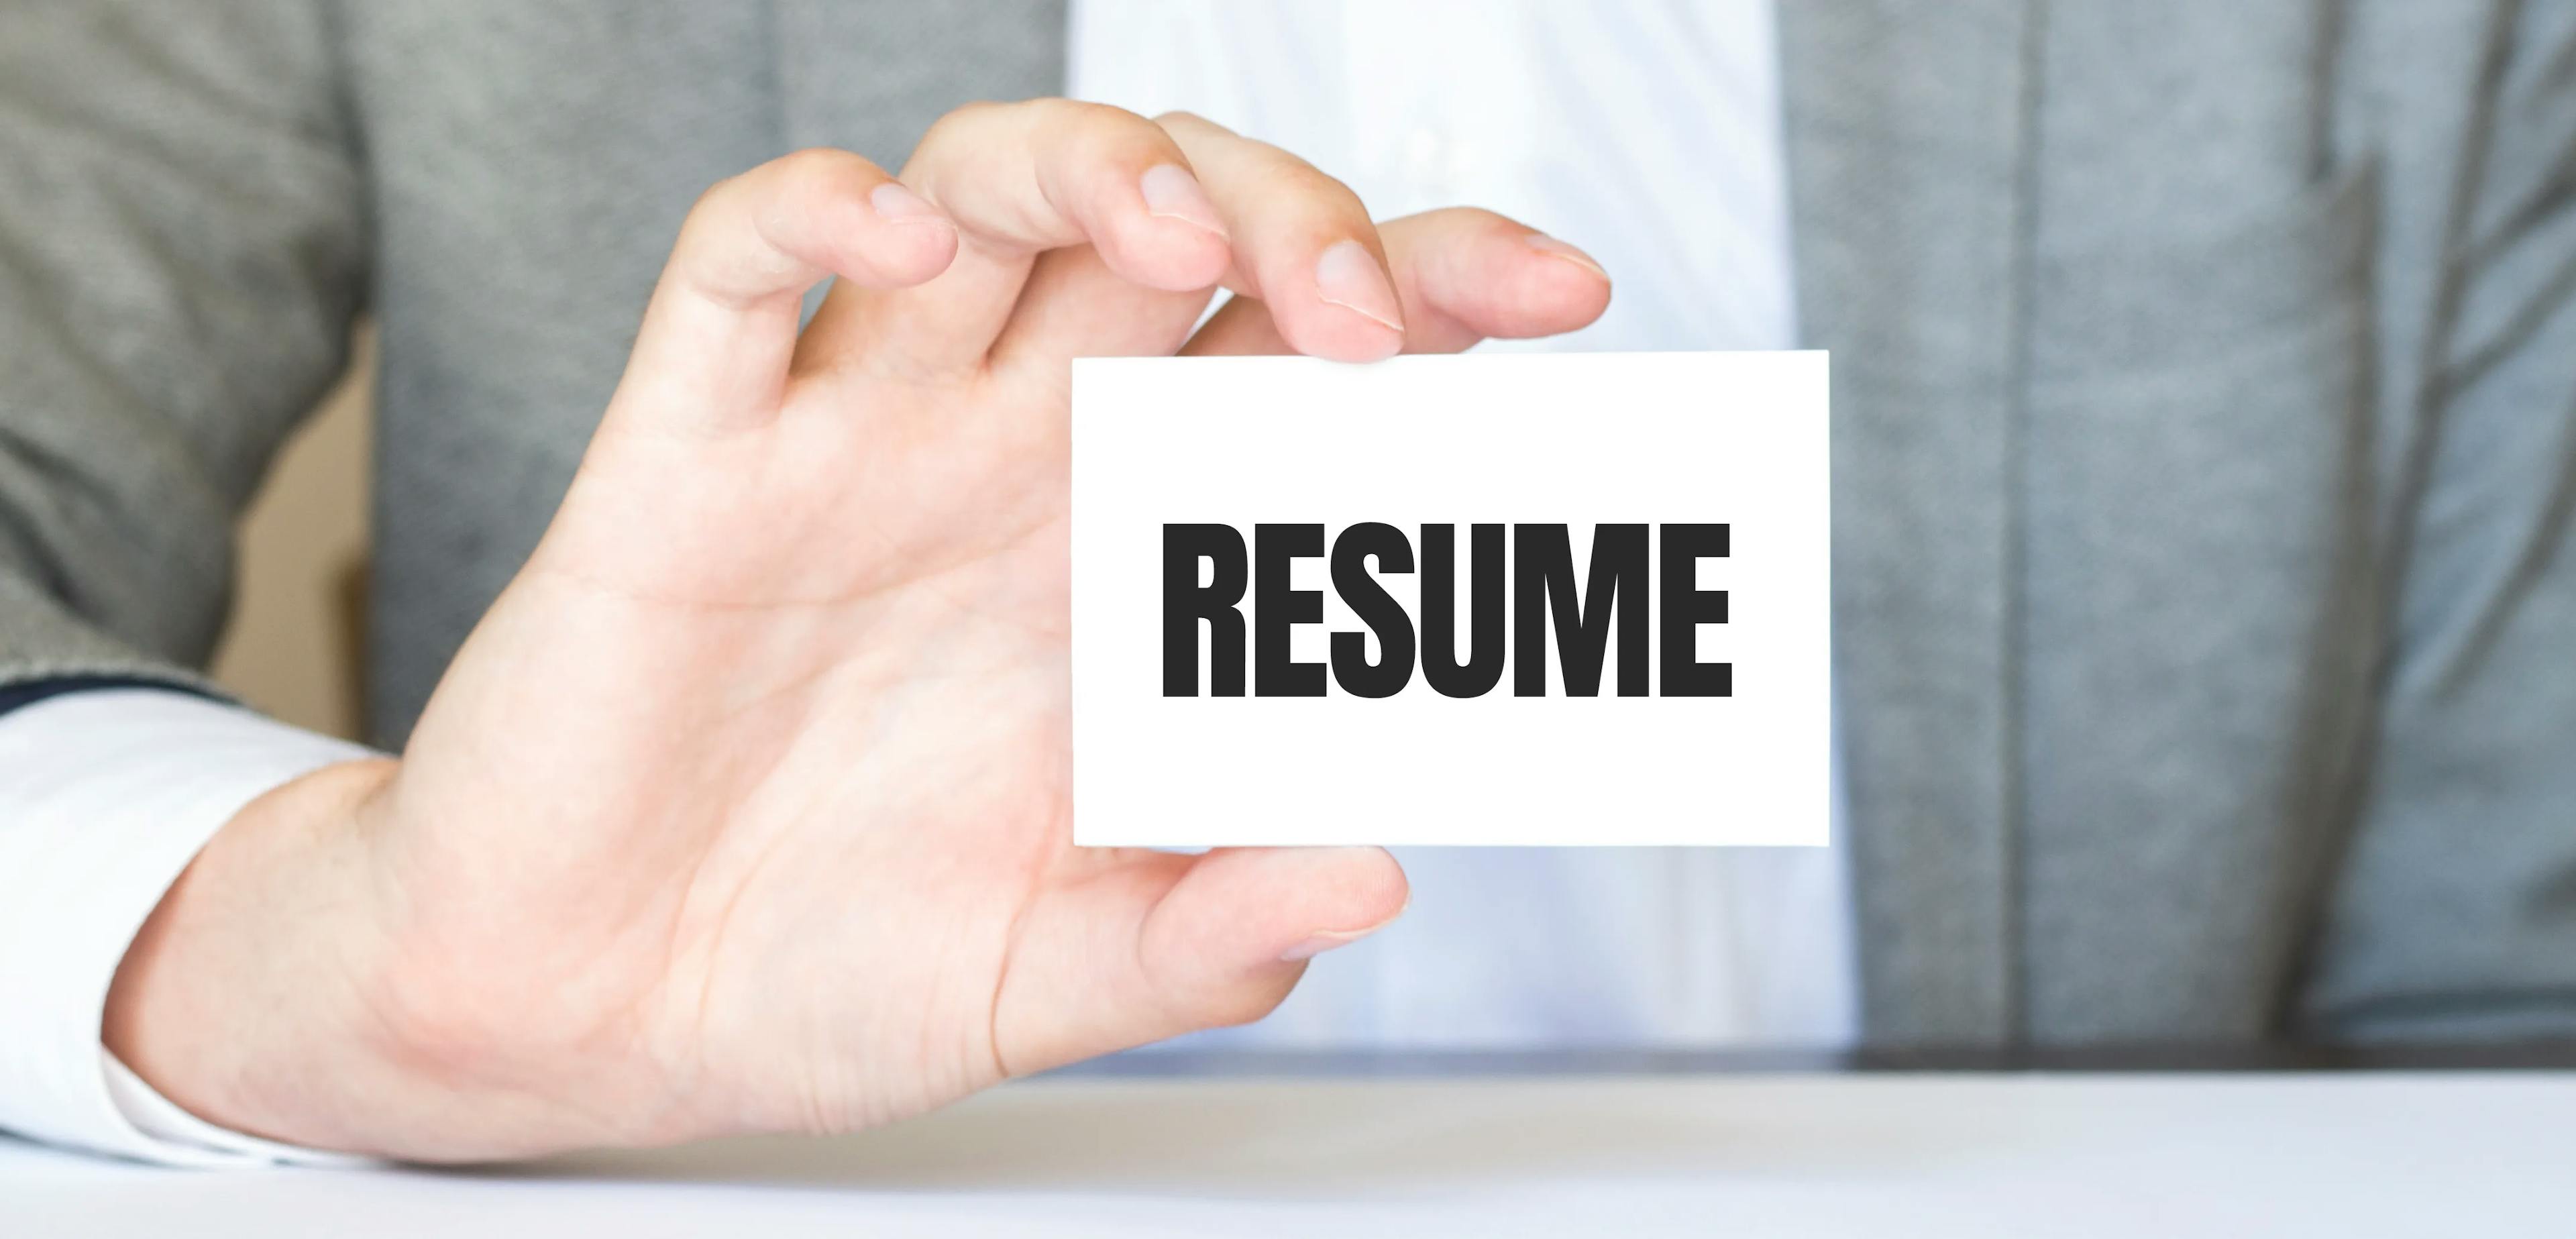 Resume Screening for Effective Hiring: Guide for Recruiters